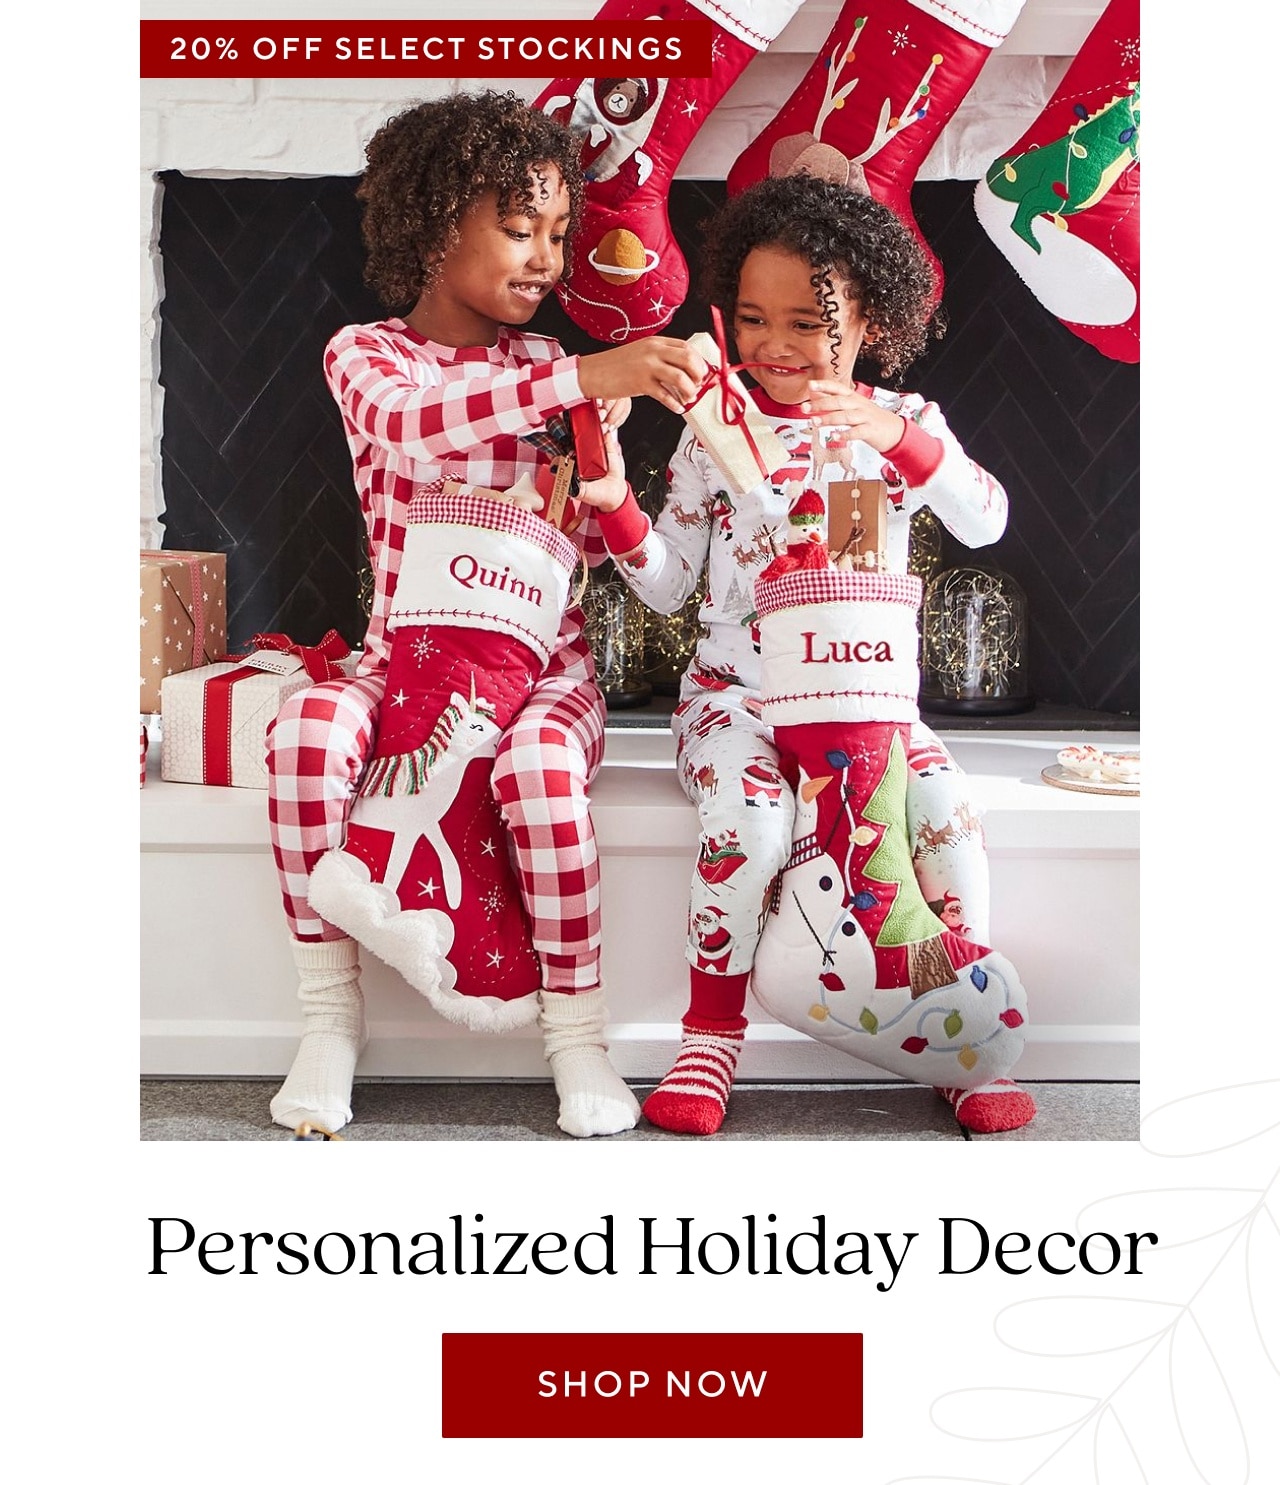 PERSONALIZED HOLIDAY DECOR